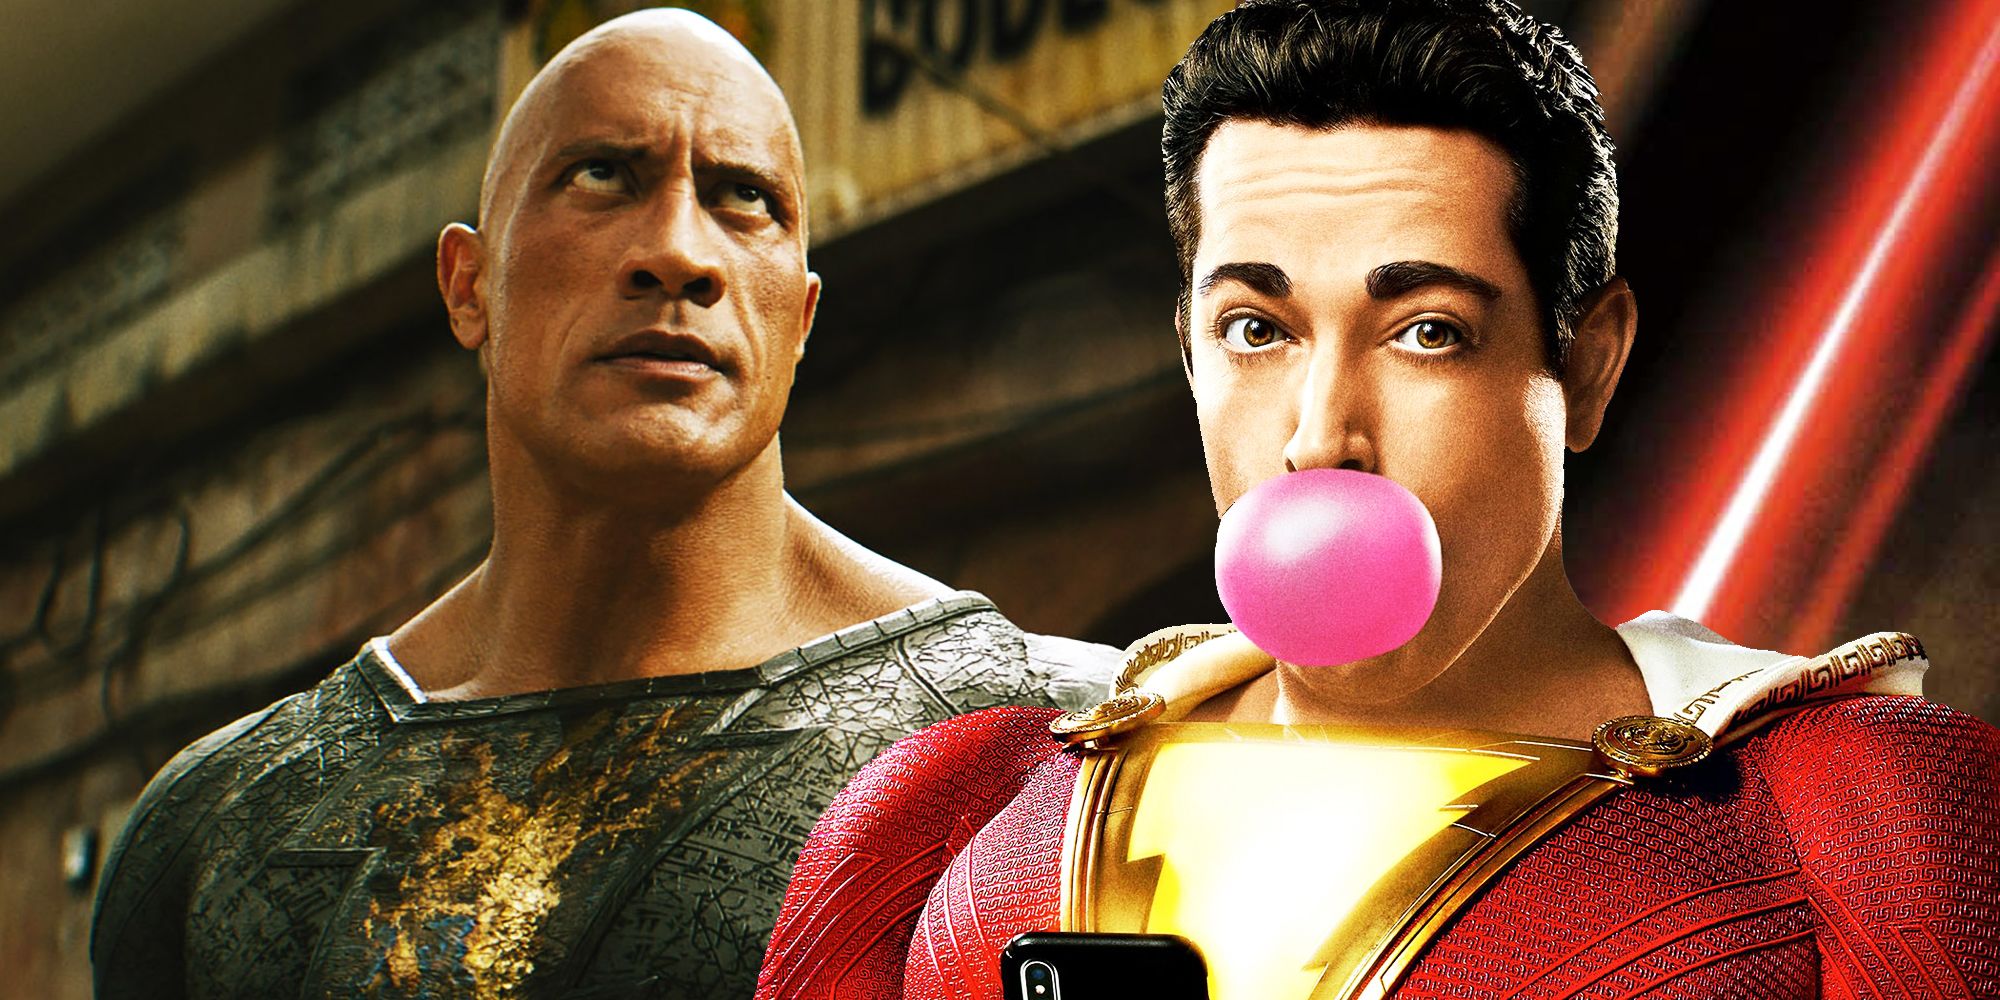 Shazam blowing his gum and Black Adam looking stern in their respective DCU movies.